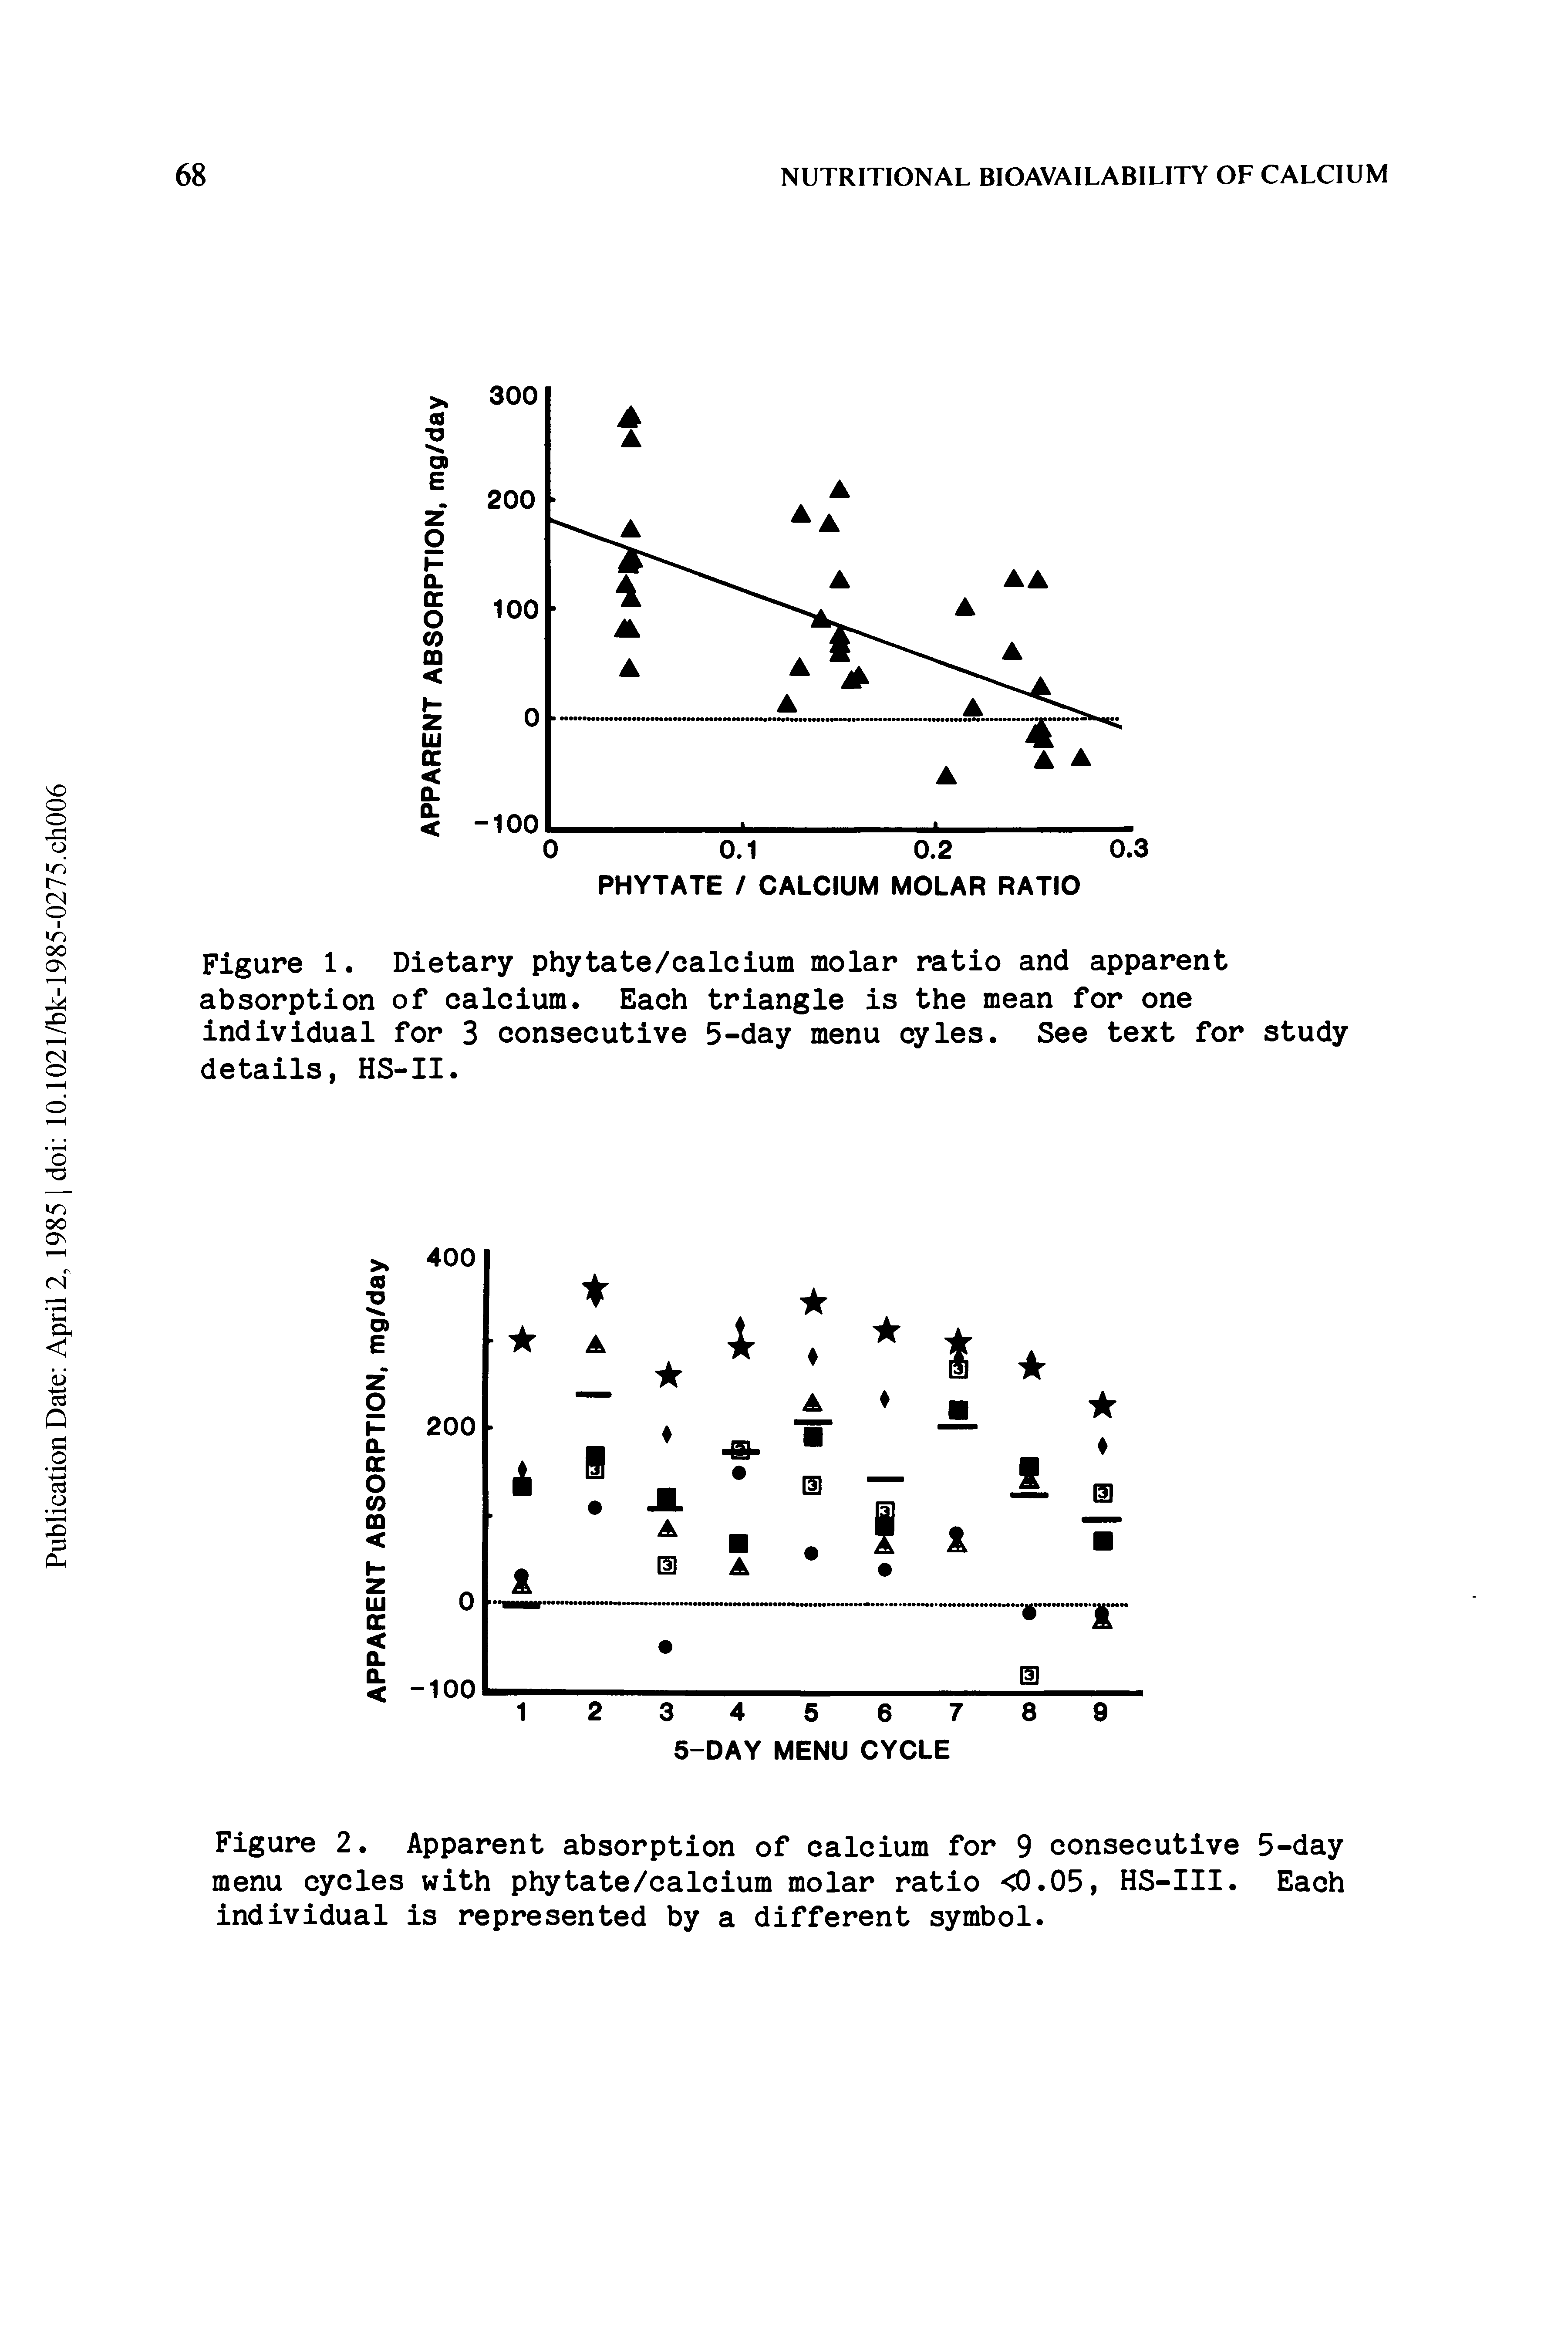 Figure 1. Dietary phytate/calcium molar ratio and apparent absorption of calcium. Each triangle is the mean for one individual for 3 consecutive 5-day menu cyles. See text for study details, HS-II.